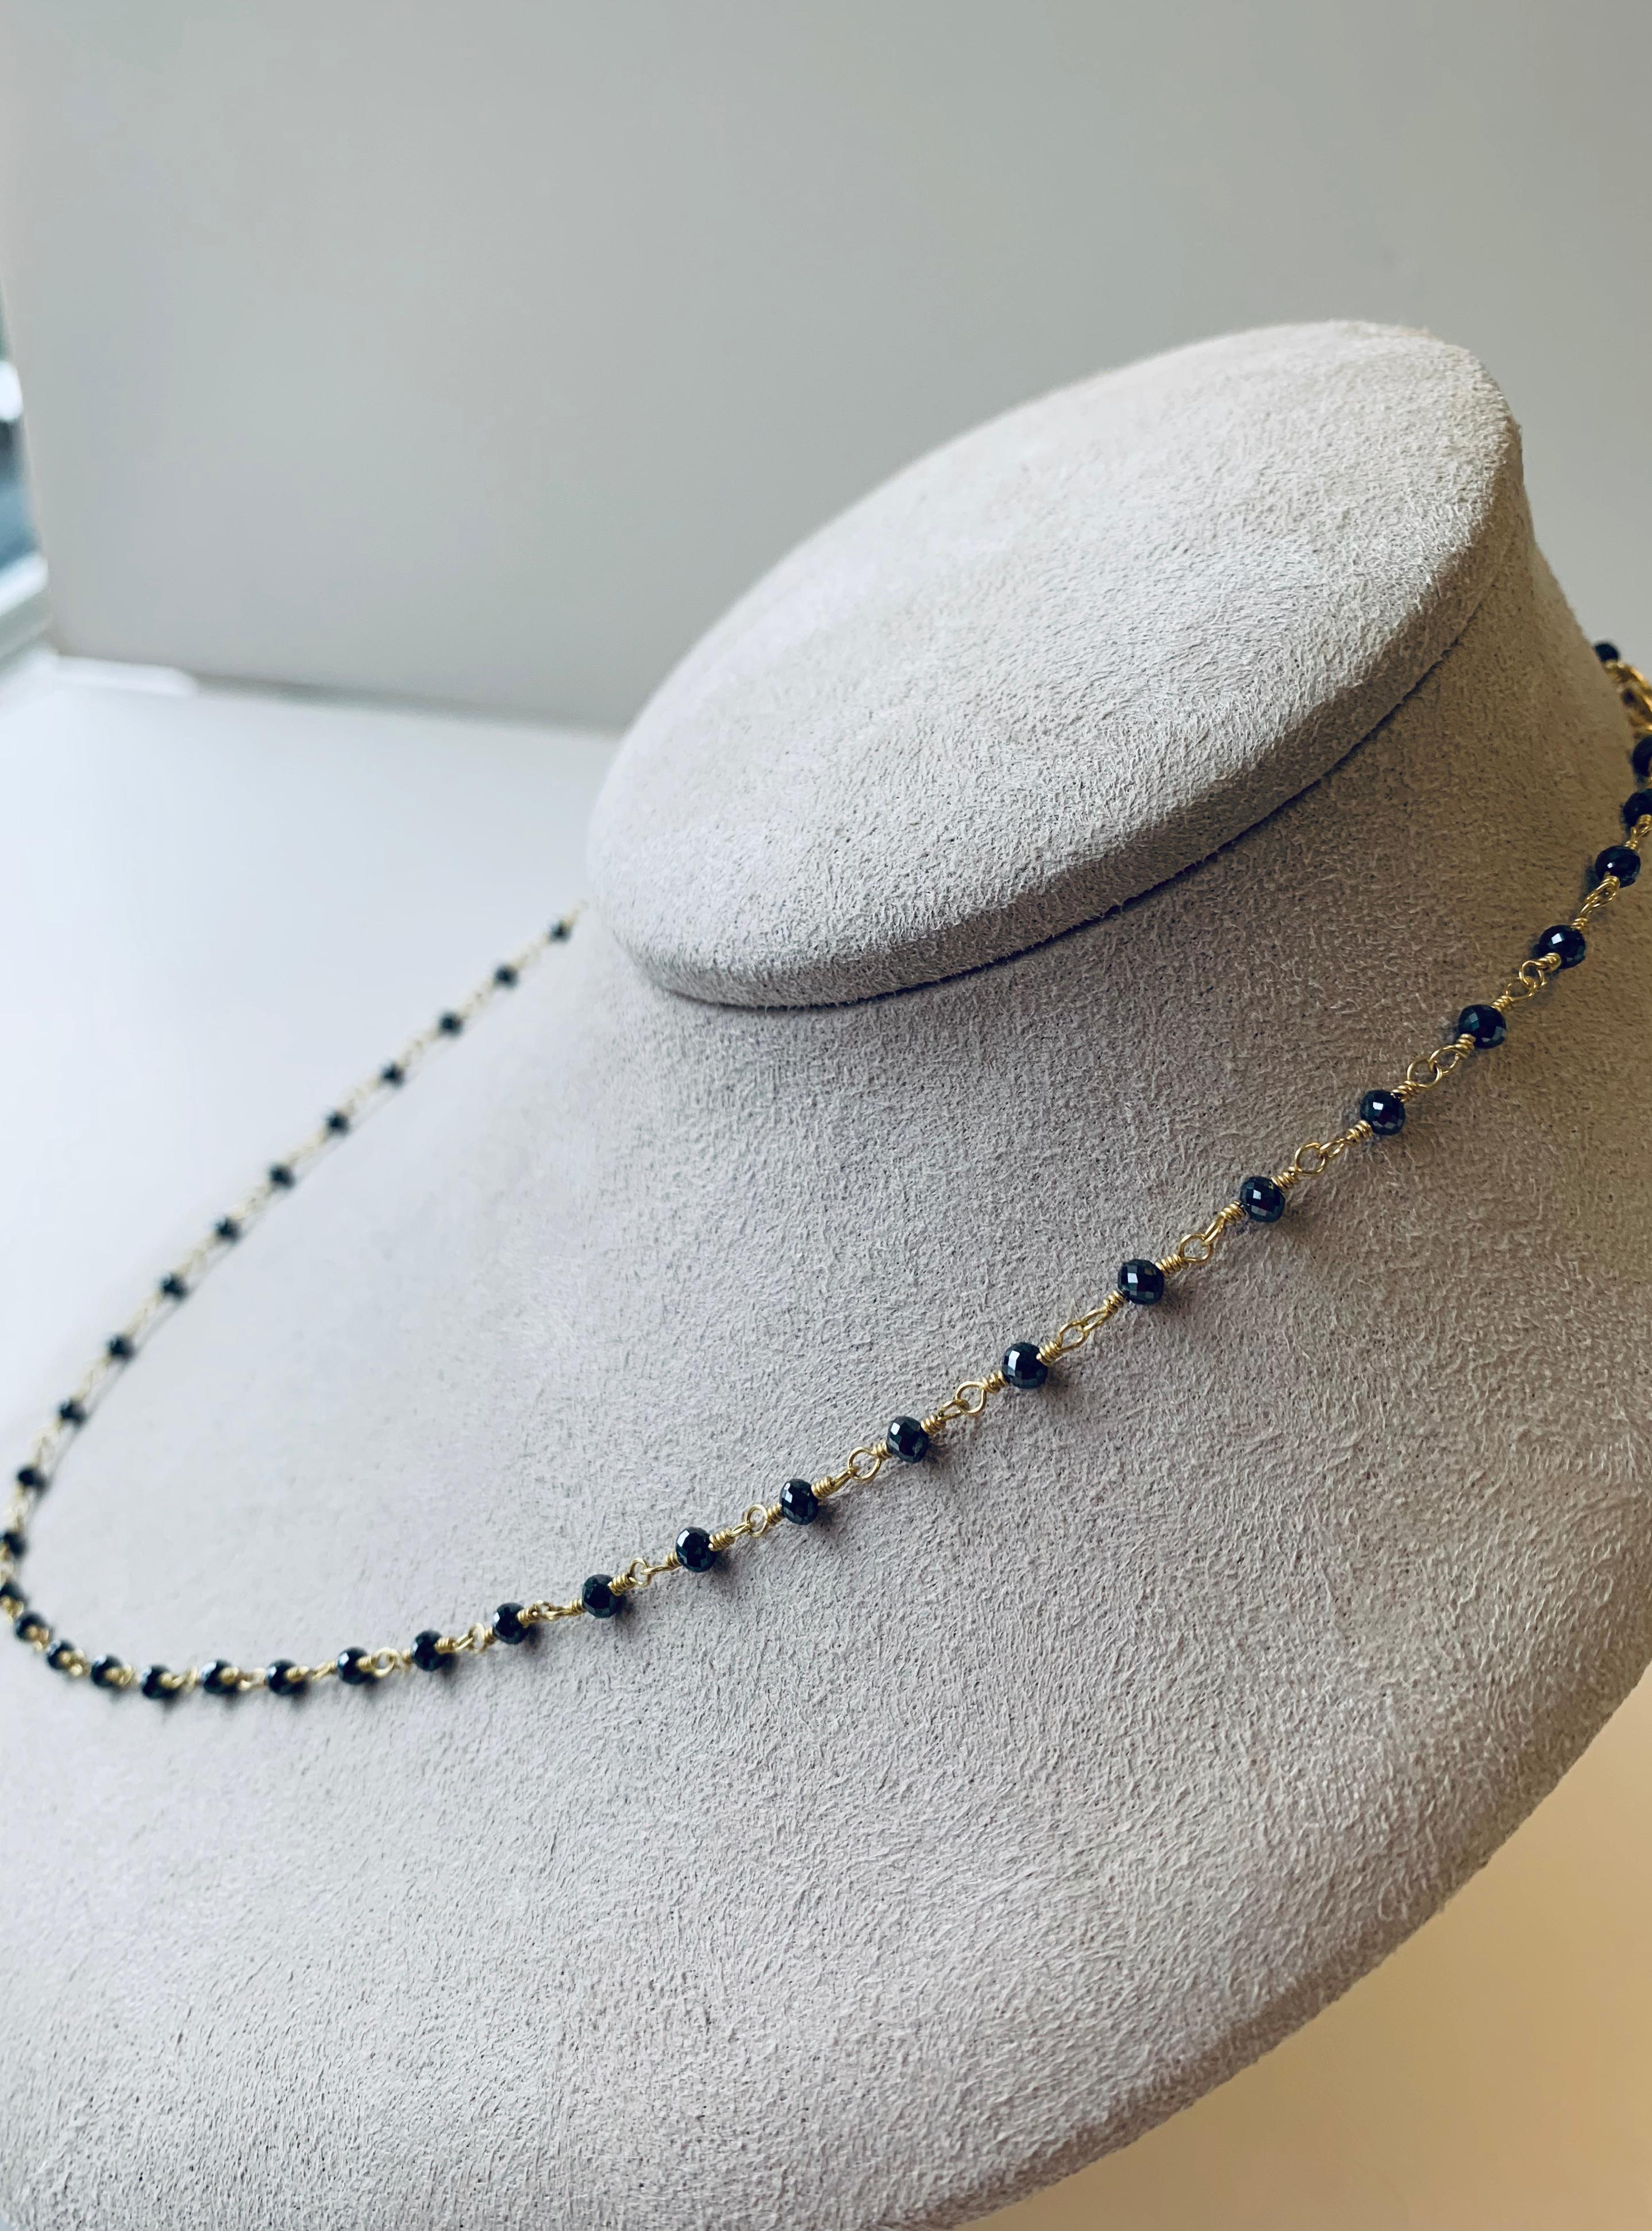 Delicate and bright 18 inch black diamond bead necklace on 20 karat gold, elegant and easy to wear. 
Entirely handcrafted in New York and one of a kind.
12.5 carats of black diamonds the necklace is 18 inches long.